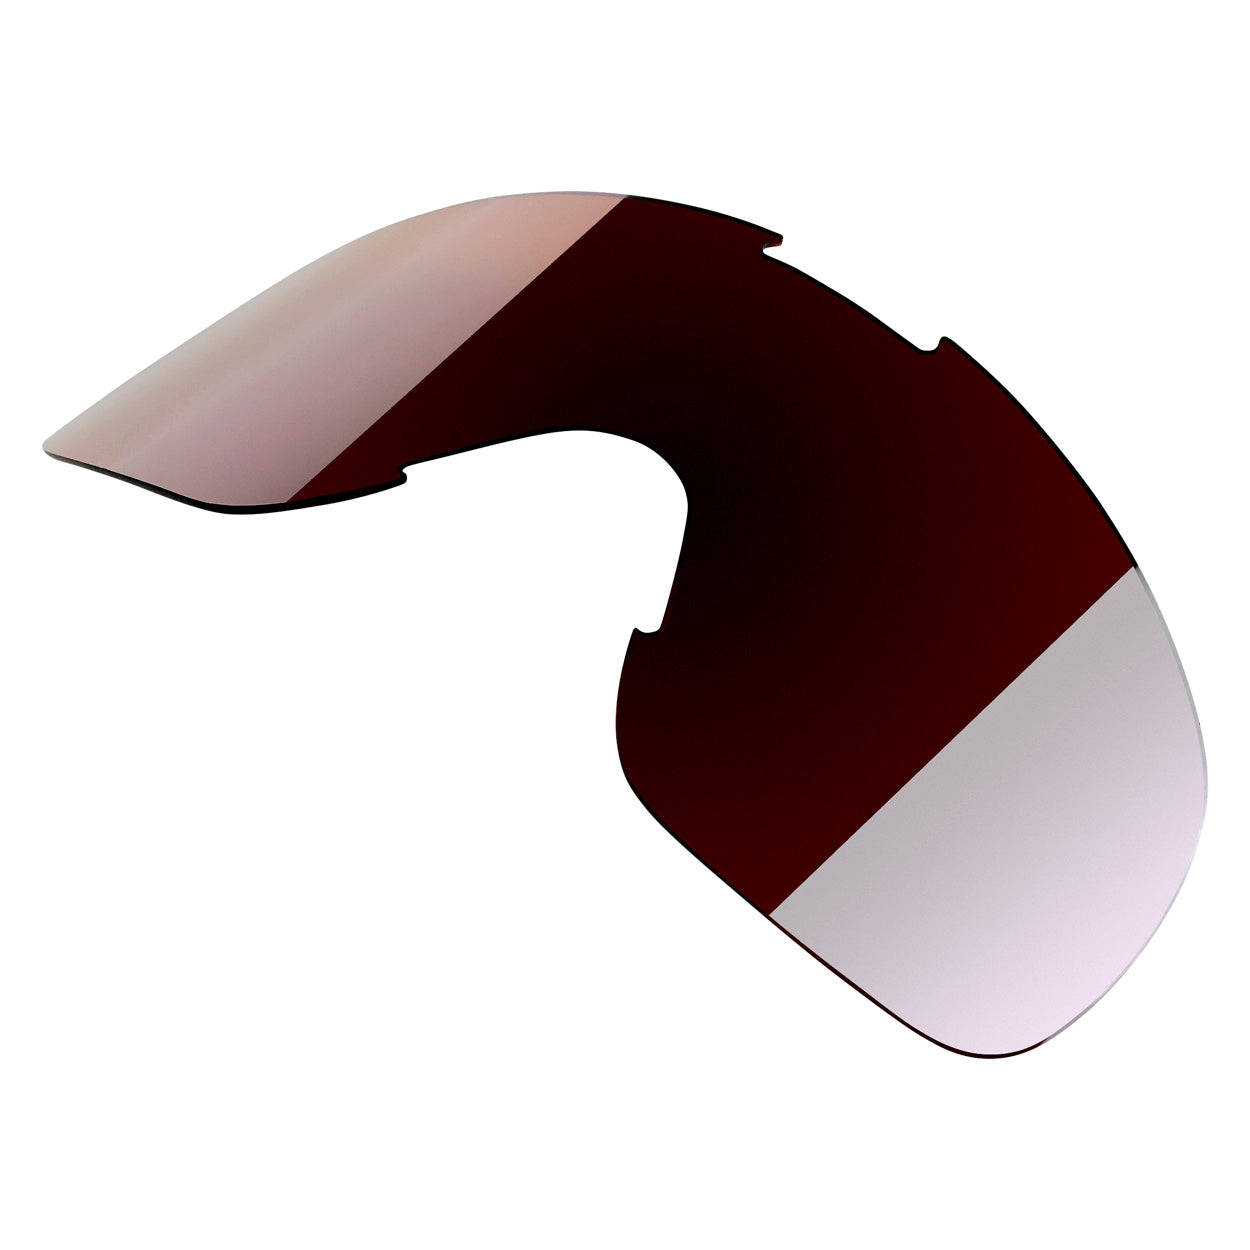 Overland 2.0 Goggle Lens - Chrome Mirror / Brown